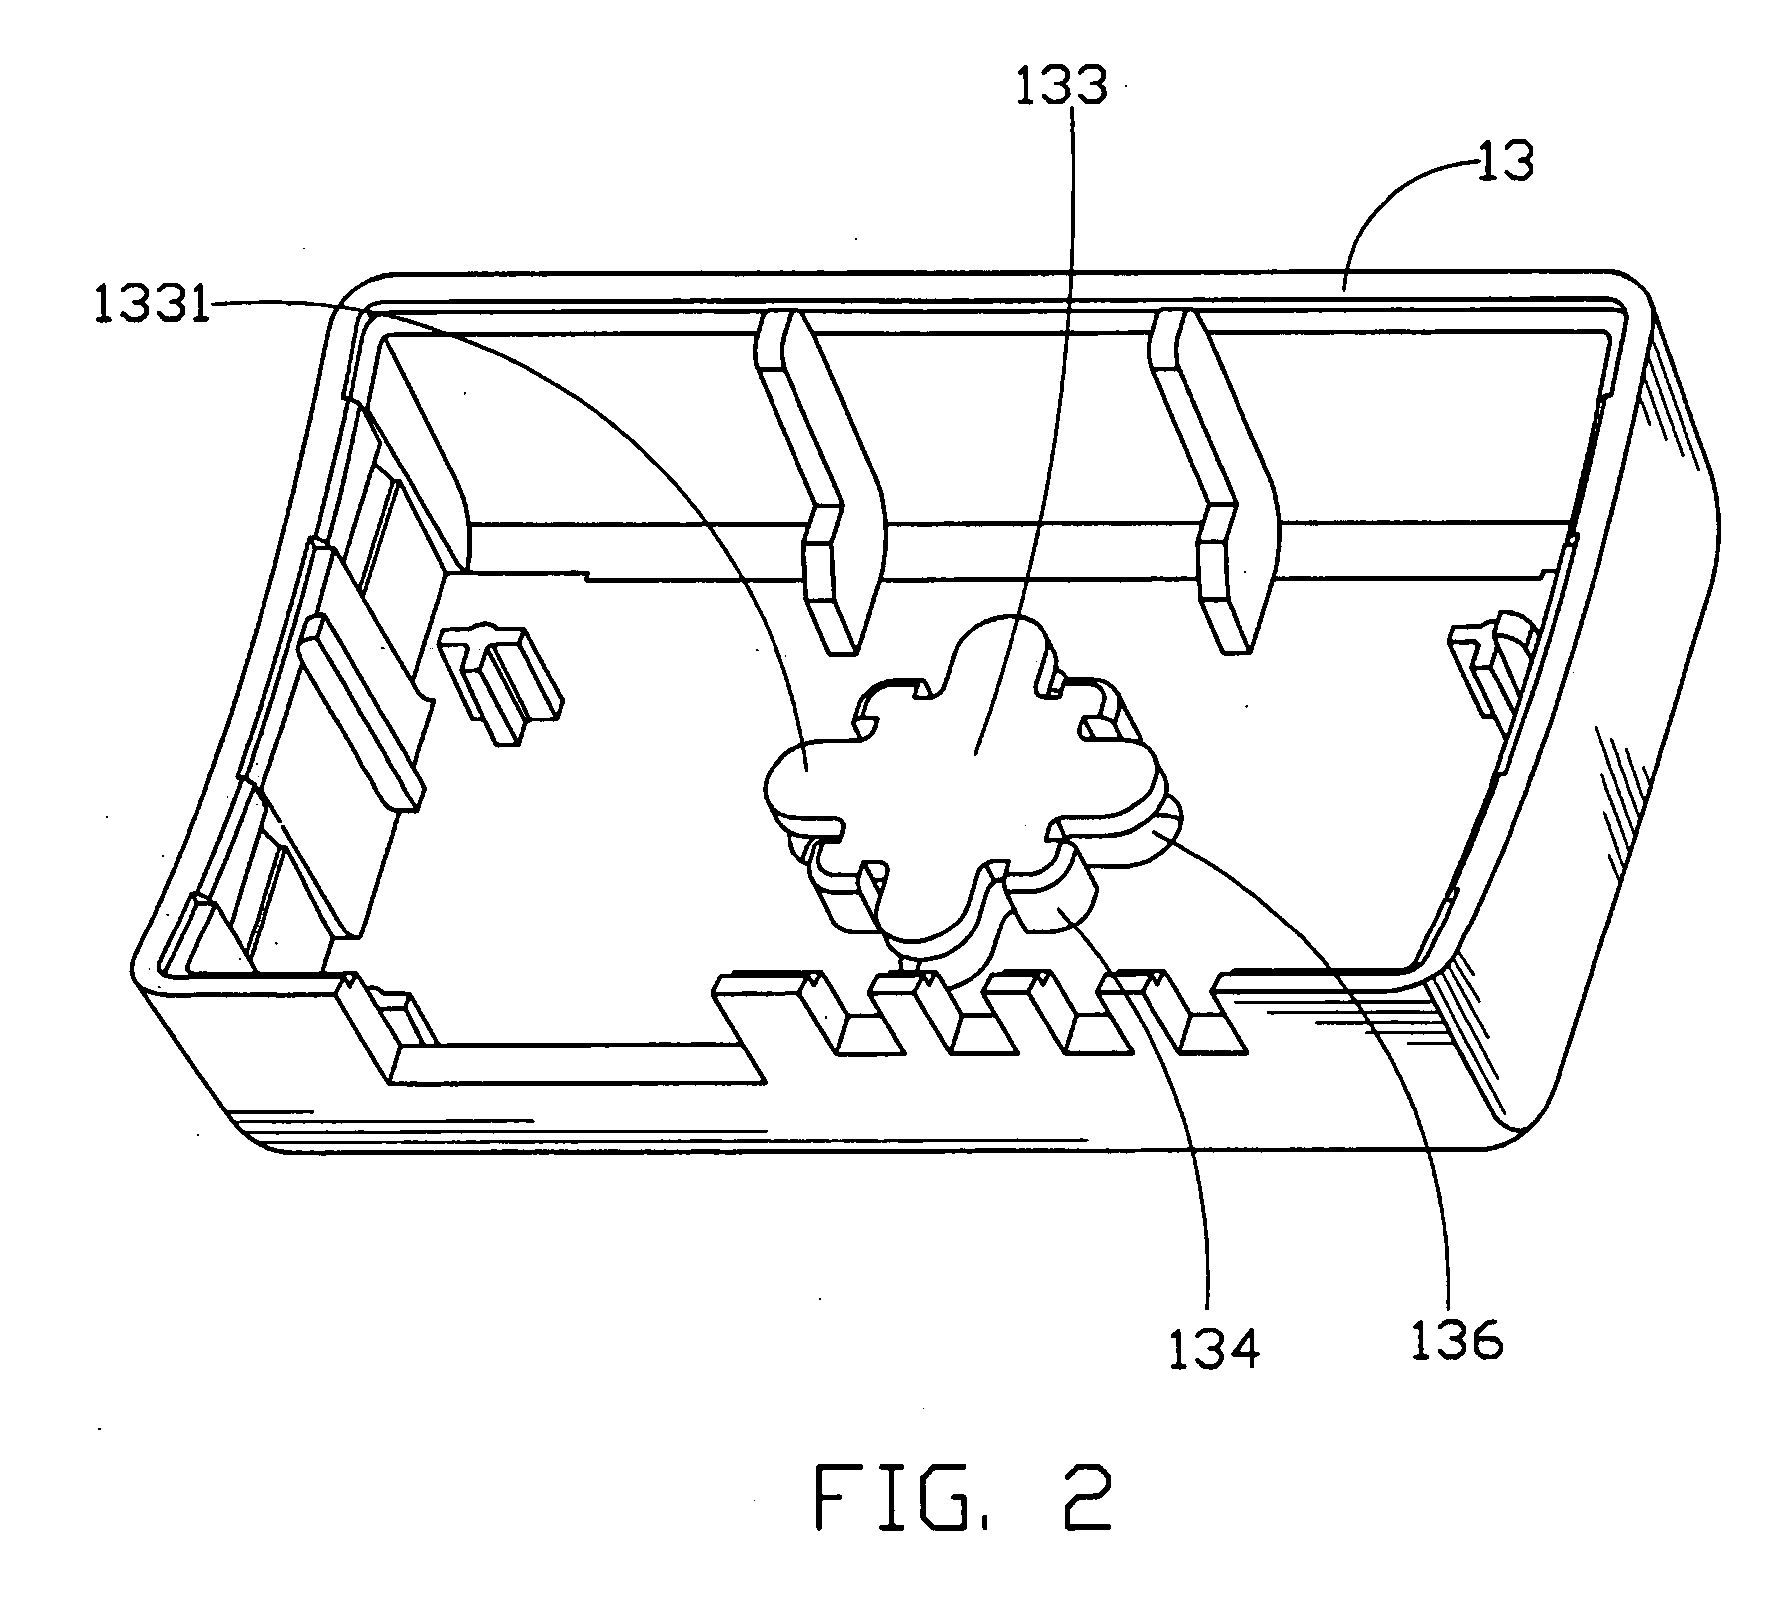 Adjustable wall-mounted information appliance assembly